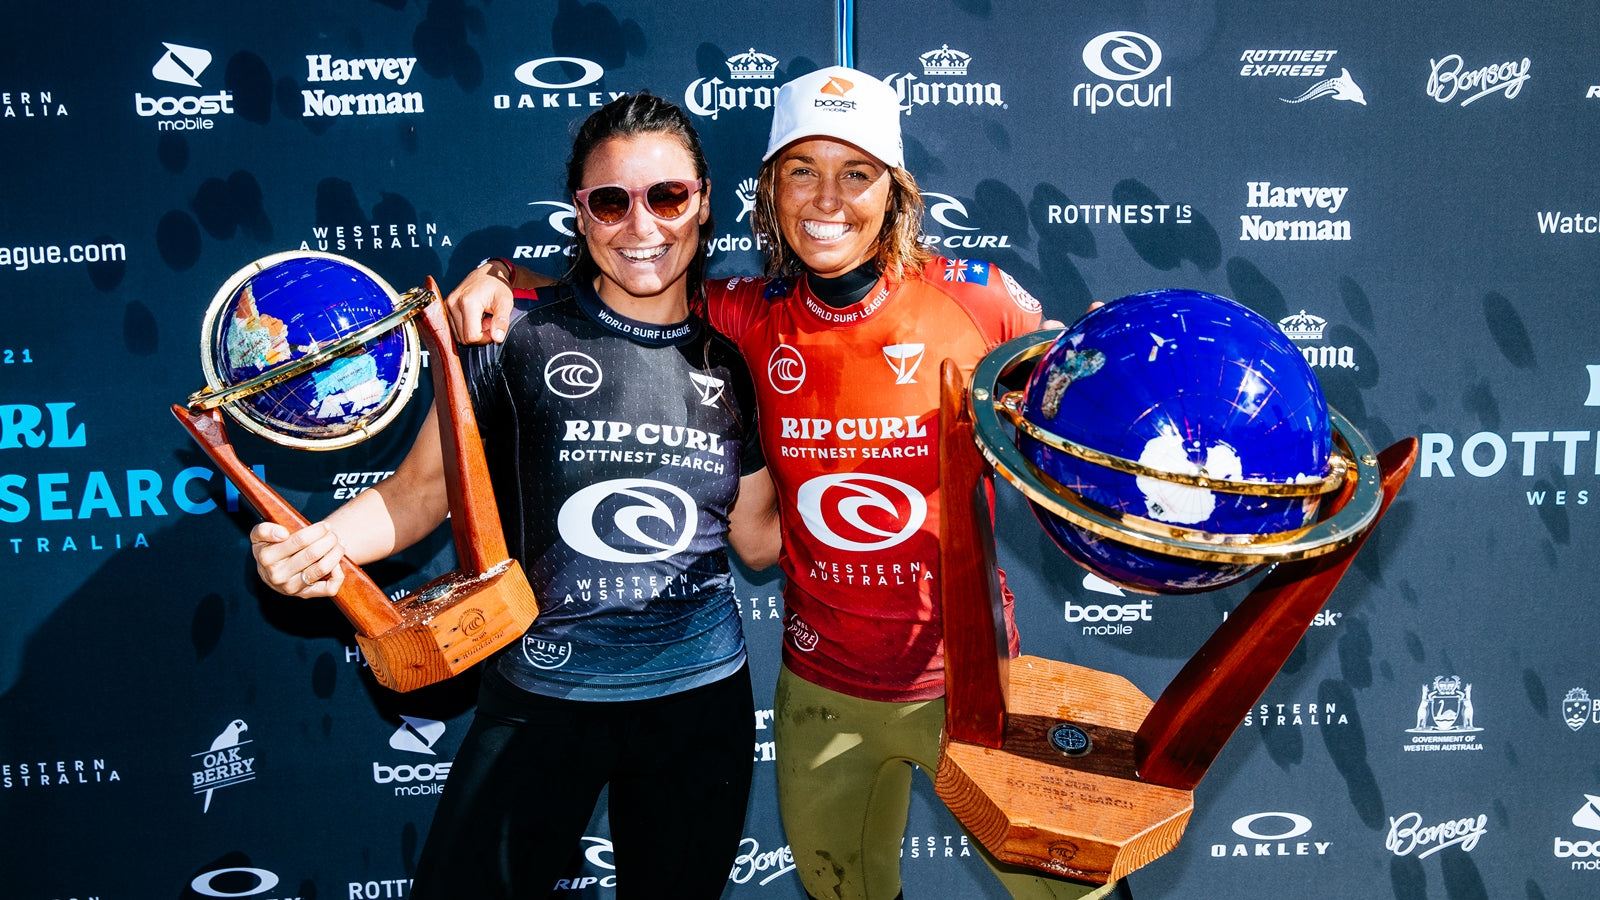 Sally Fitzgibbons wins the 2021 Rip Curl Rottnest Search Pres. by Corona | Photo: © WSL / Dunbar